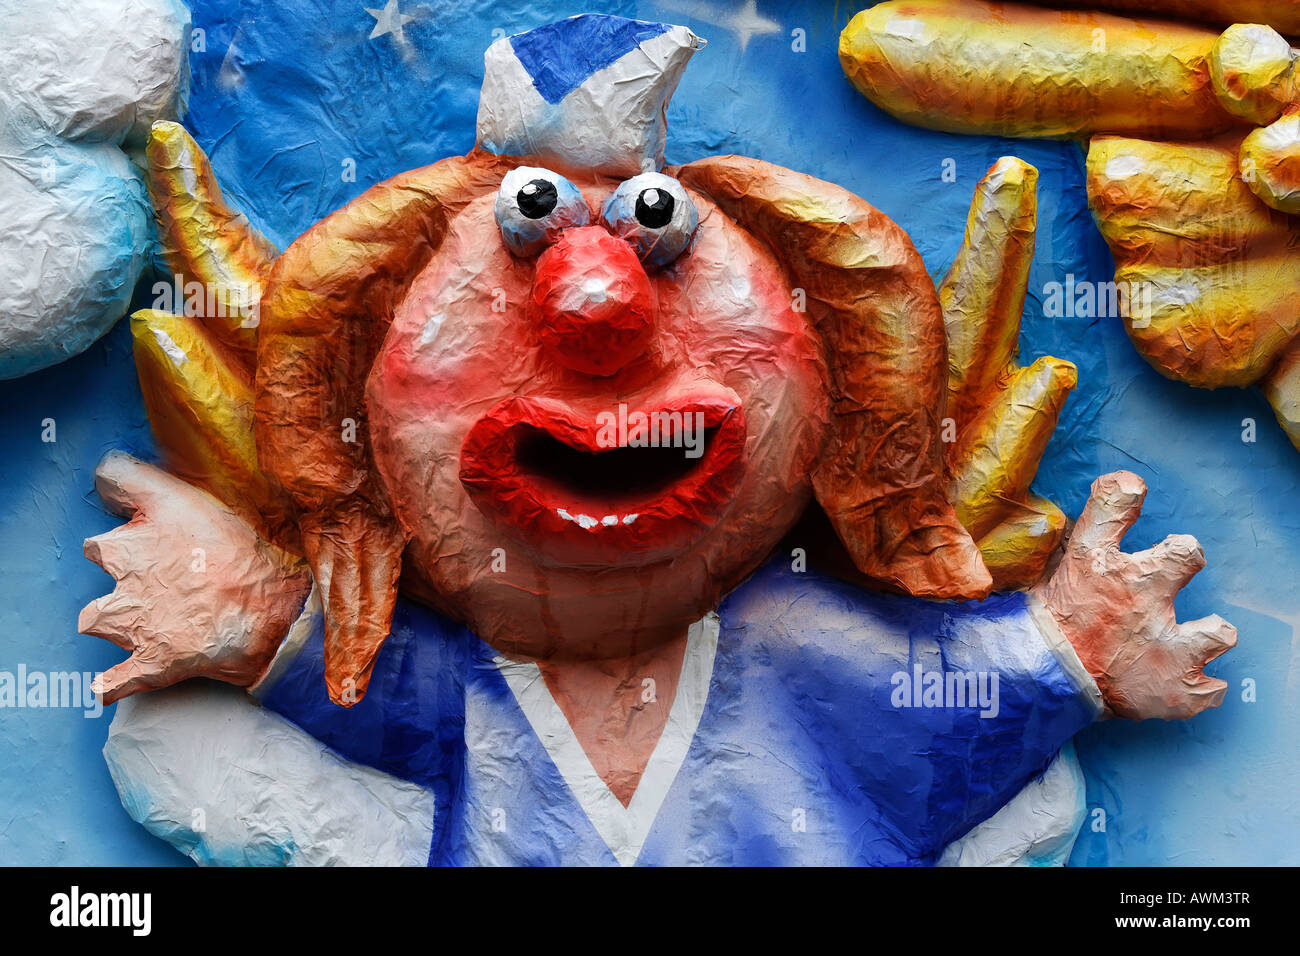 Paper-maché angel with outspread arms, Carnival (Mardi Gras) parade in Duesseldorf, North Rhine-Westphalia, Germany, Europe Stock Photo